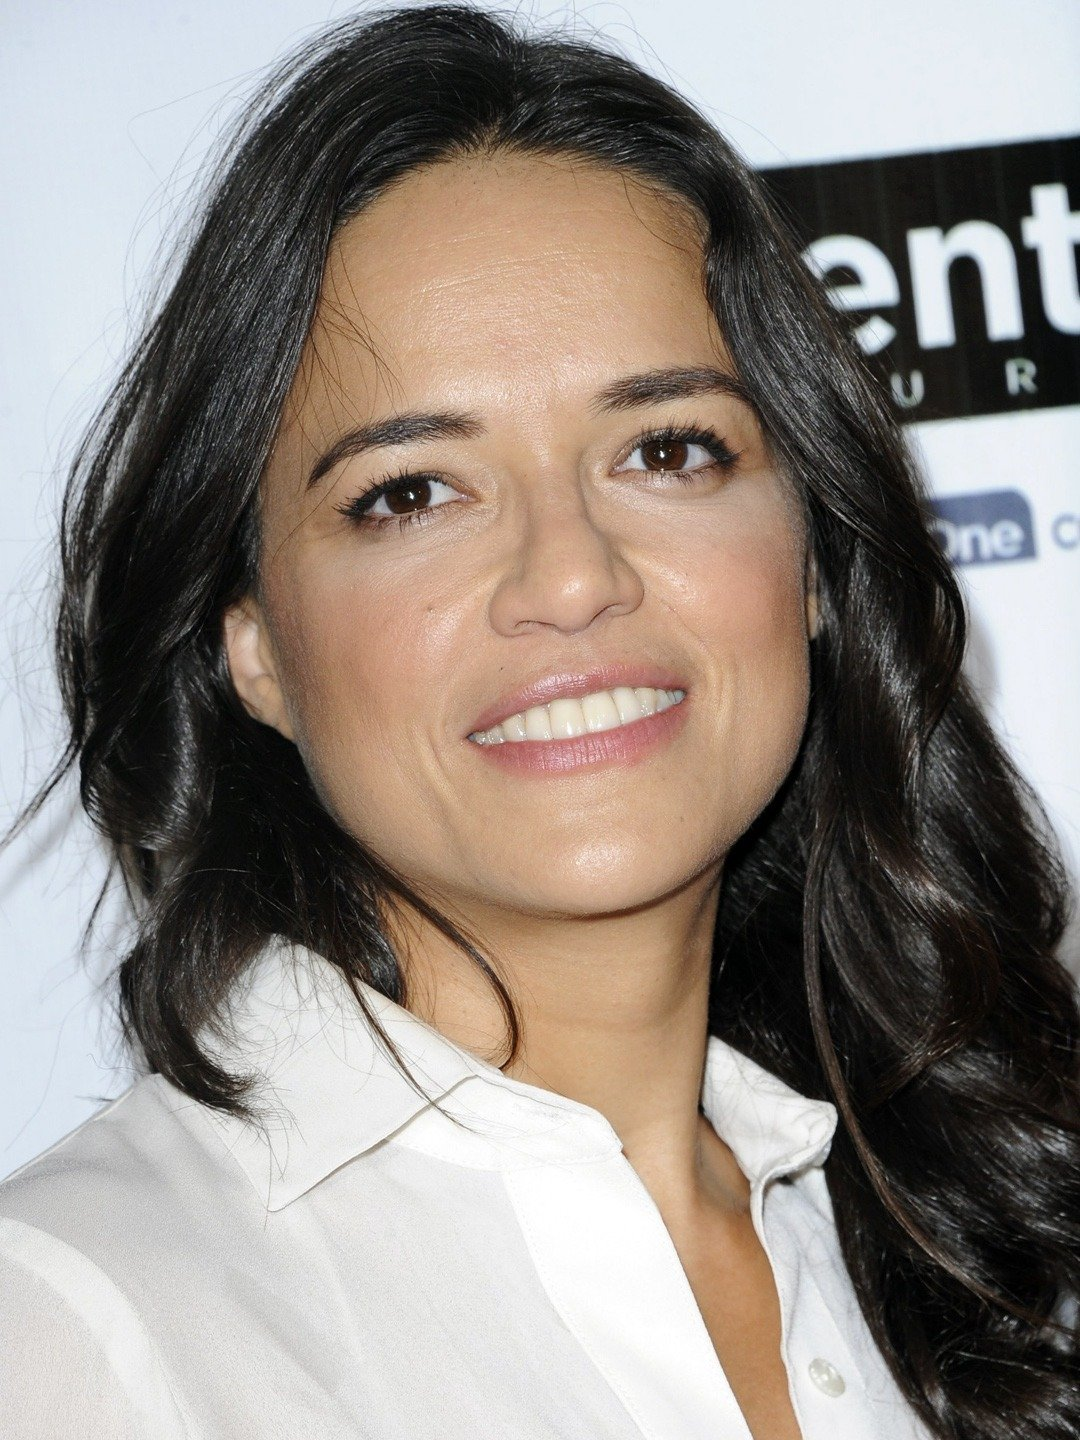 Michelle Rodriguez relocated to many locations before settling down as an actress